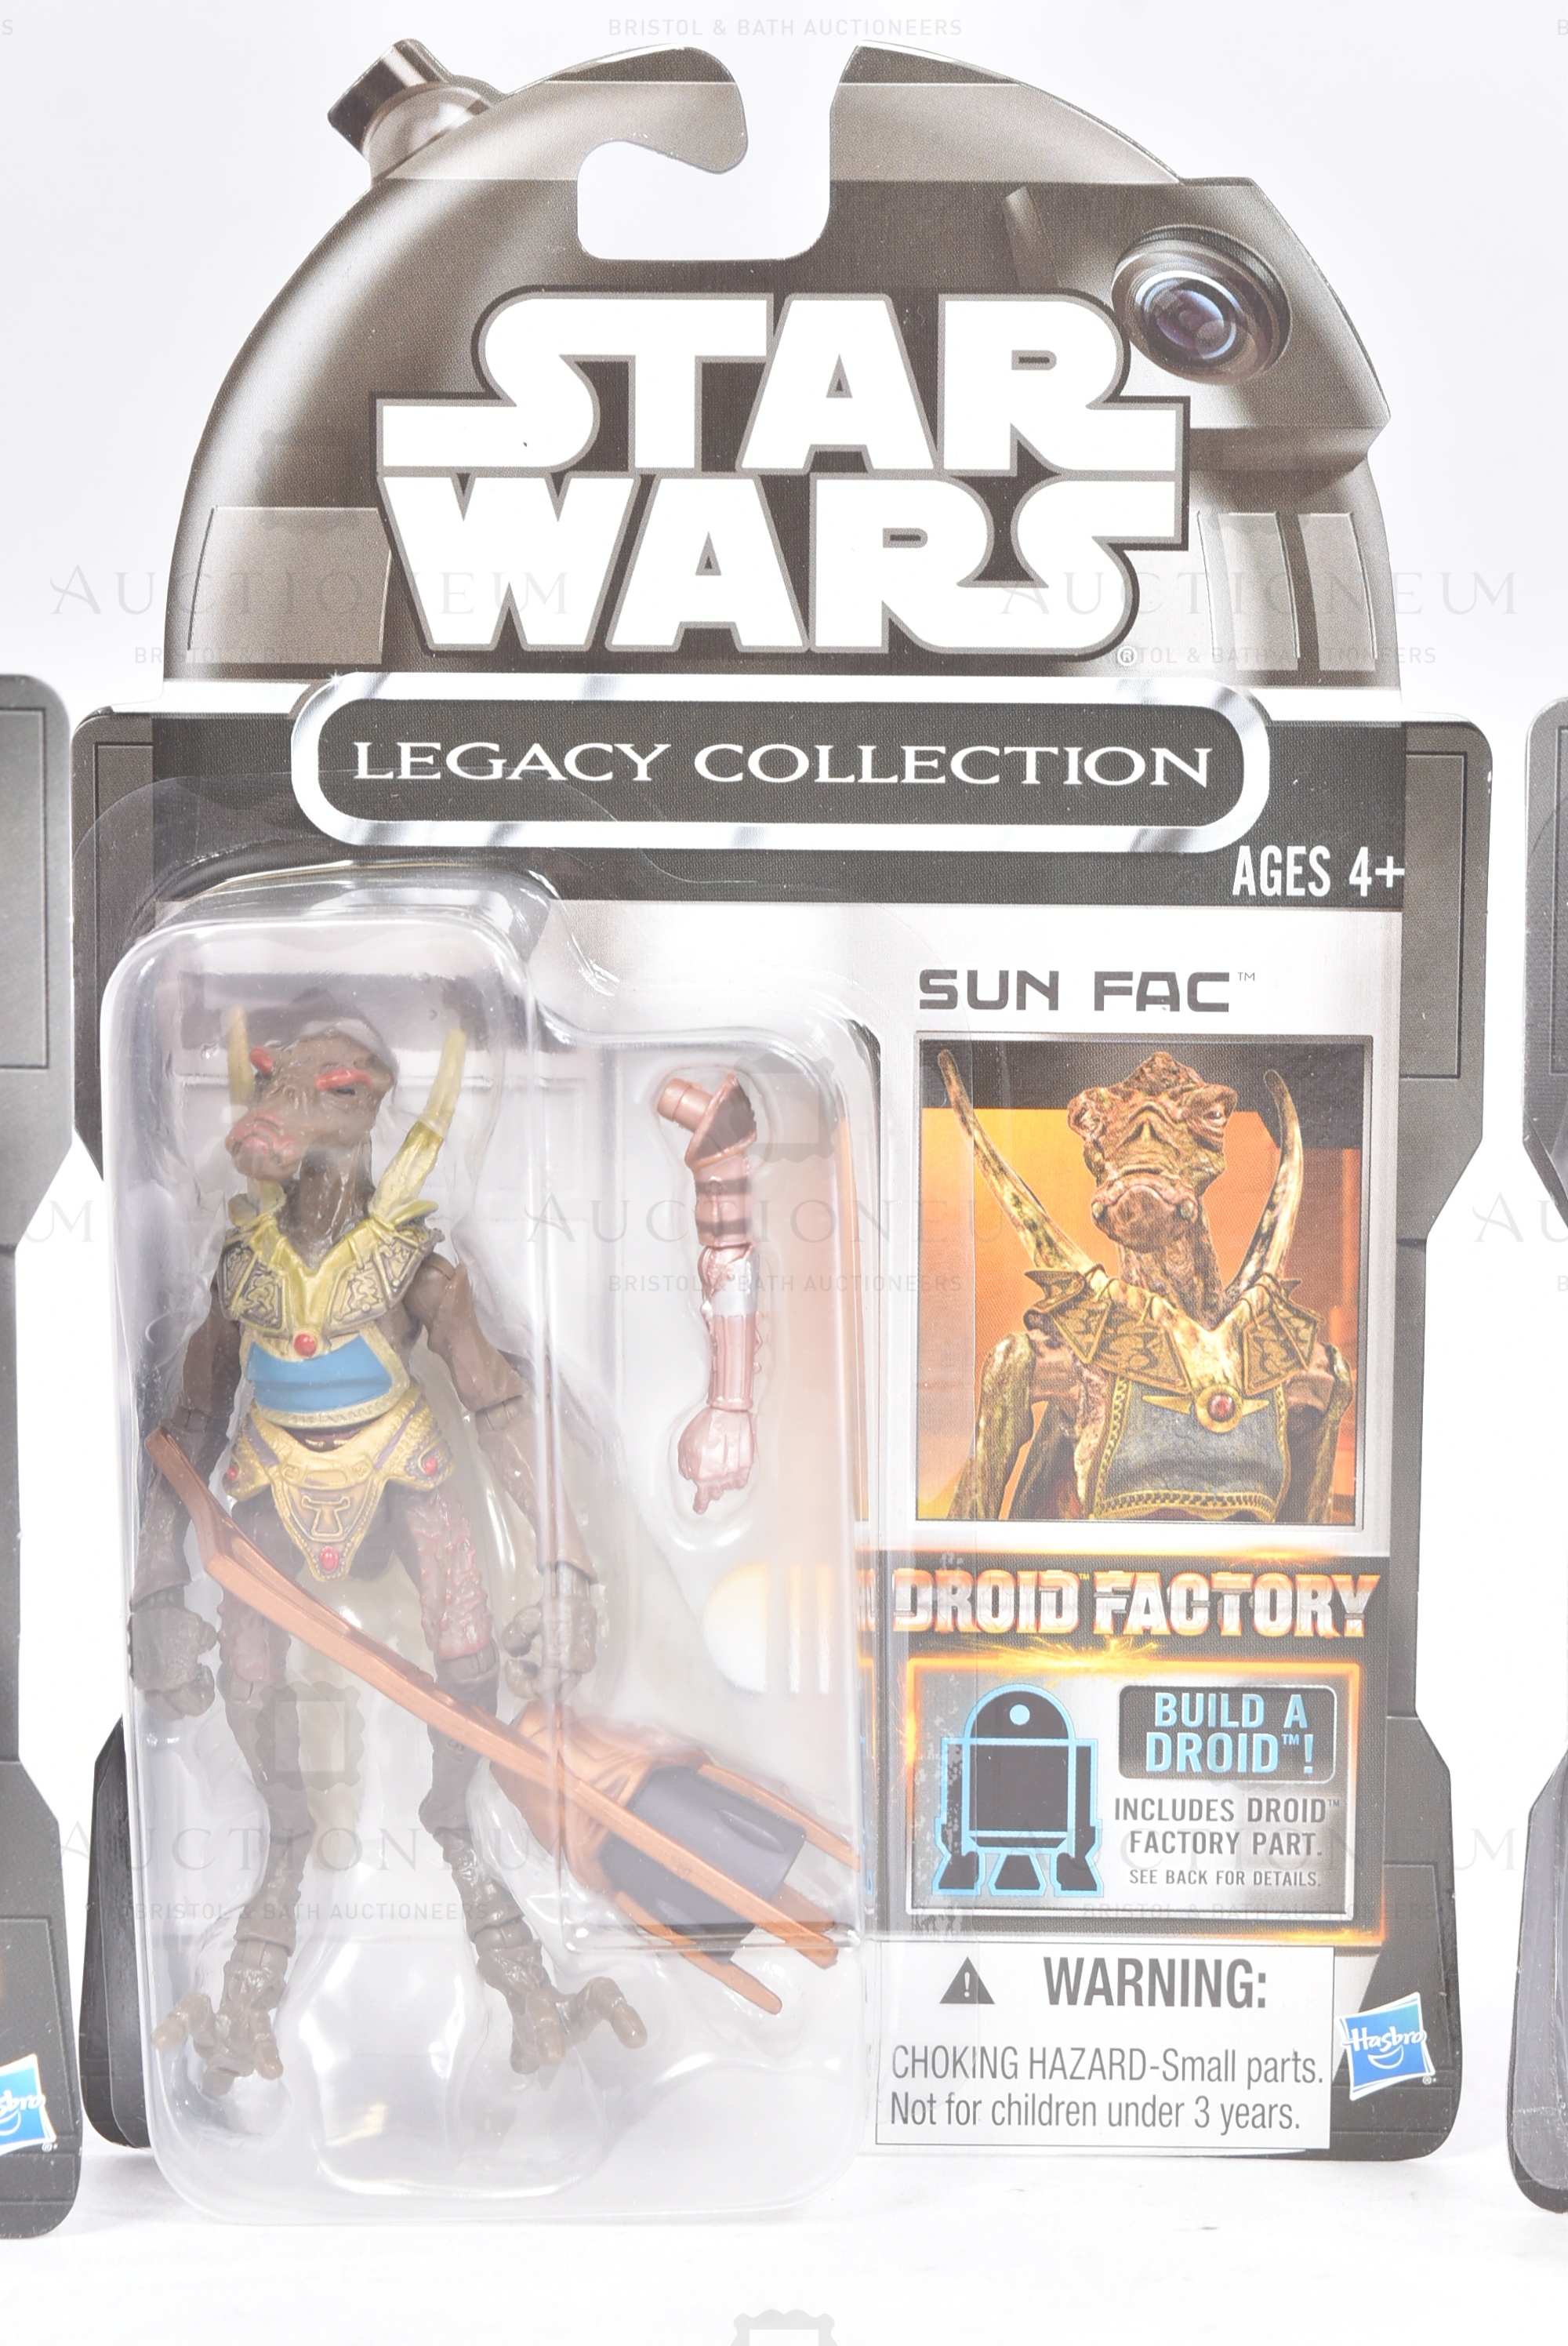 STAR WARS - LEGACY COLLECTION - TRADE BOX OF CARDED FIGURES - Image 5 of 5